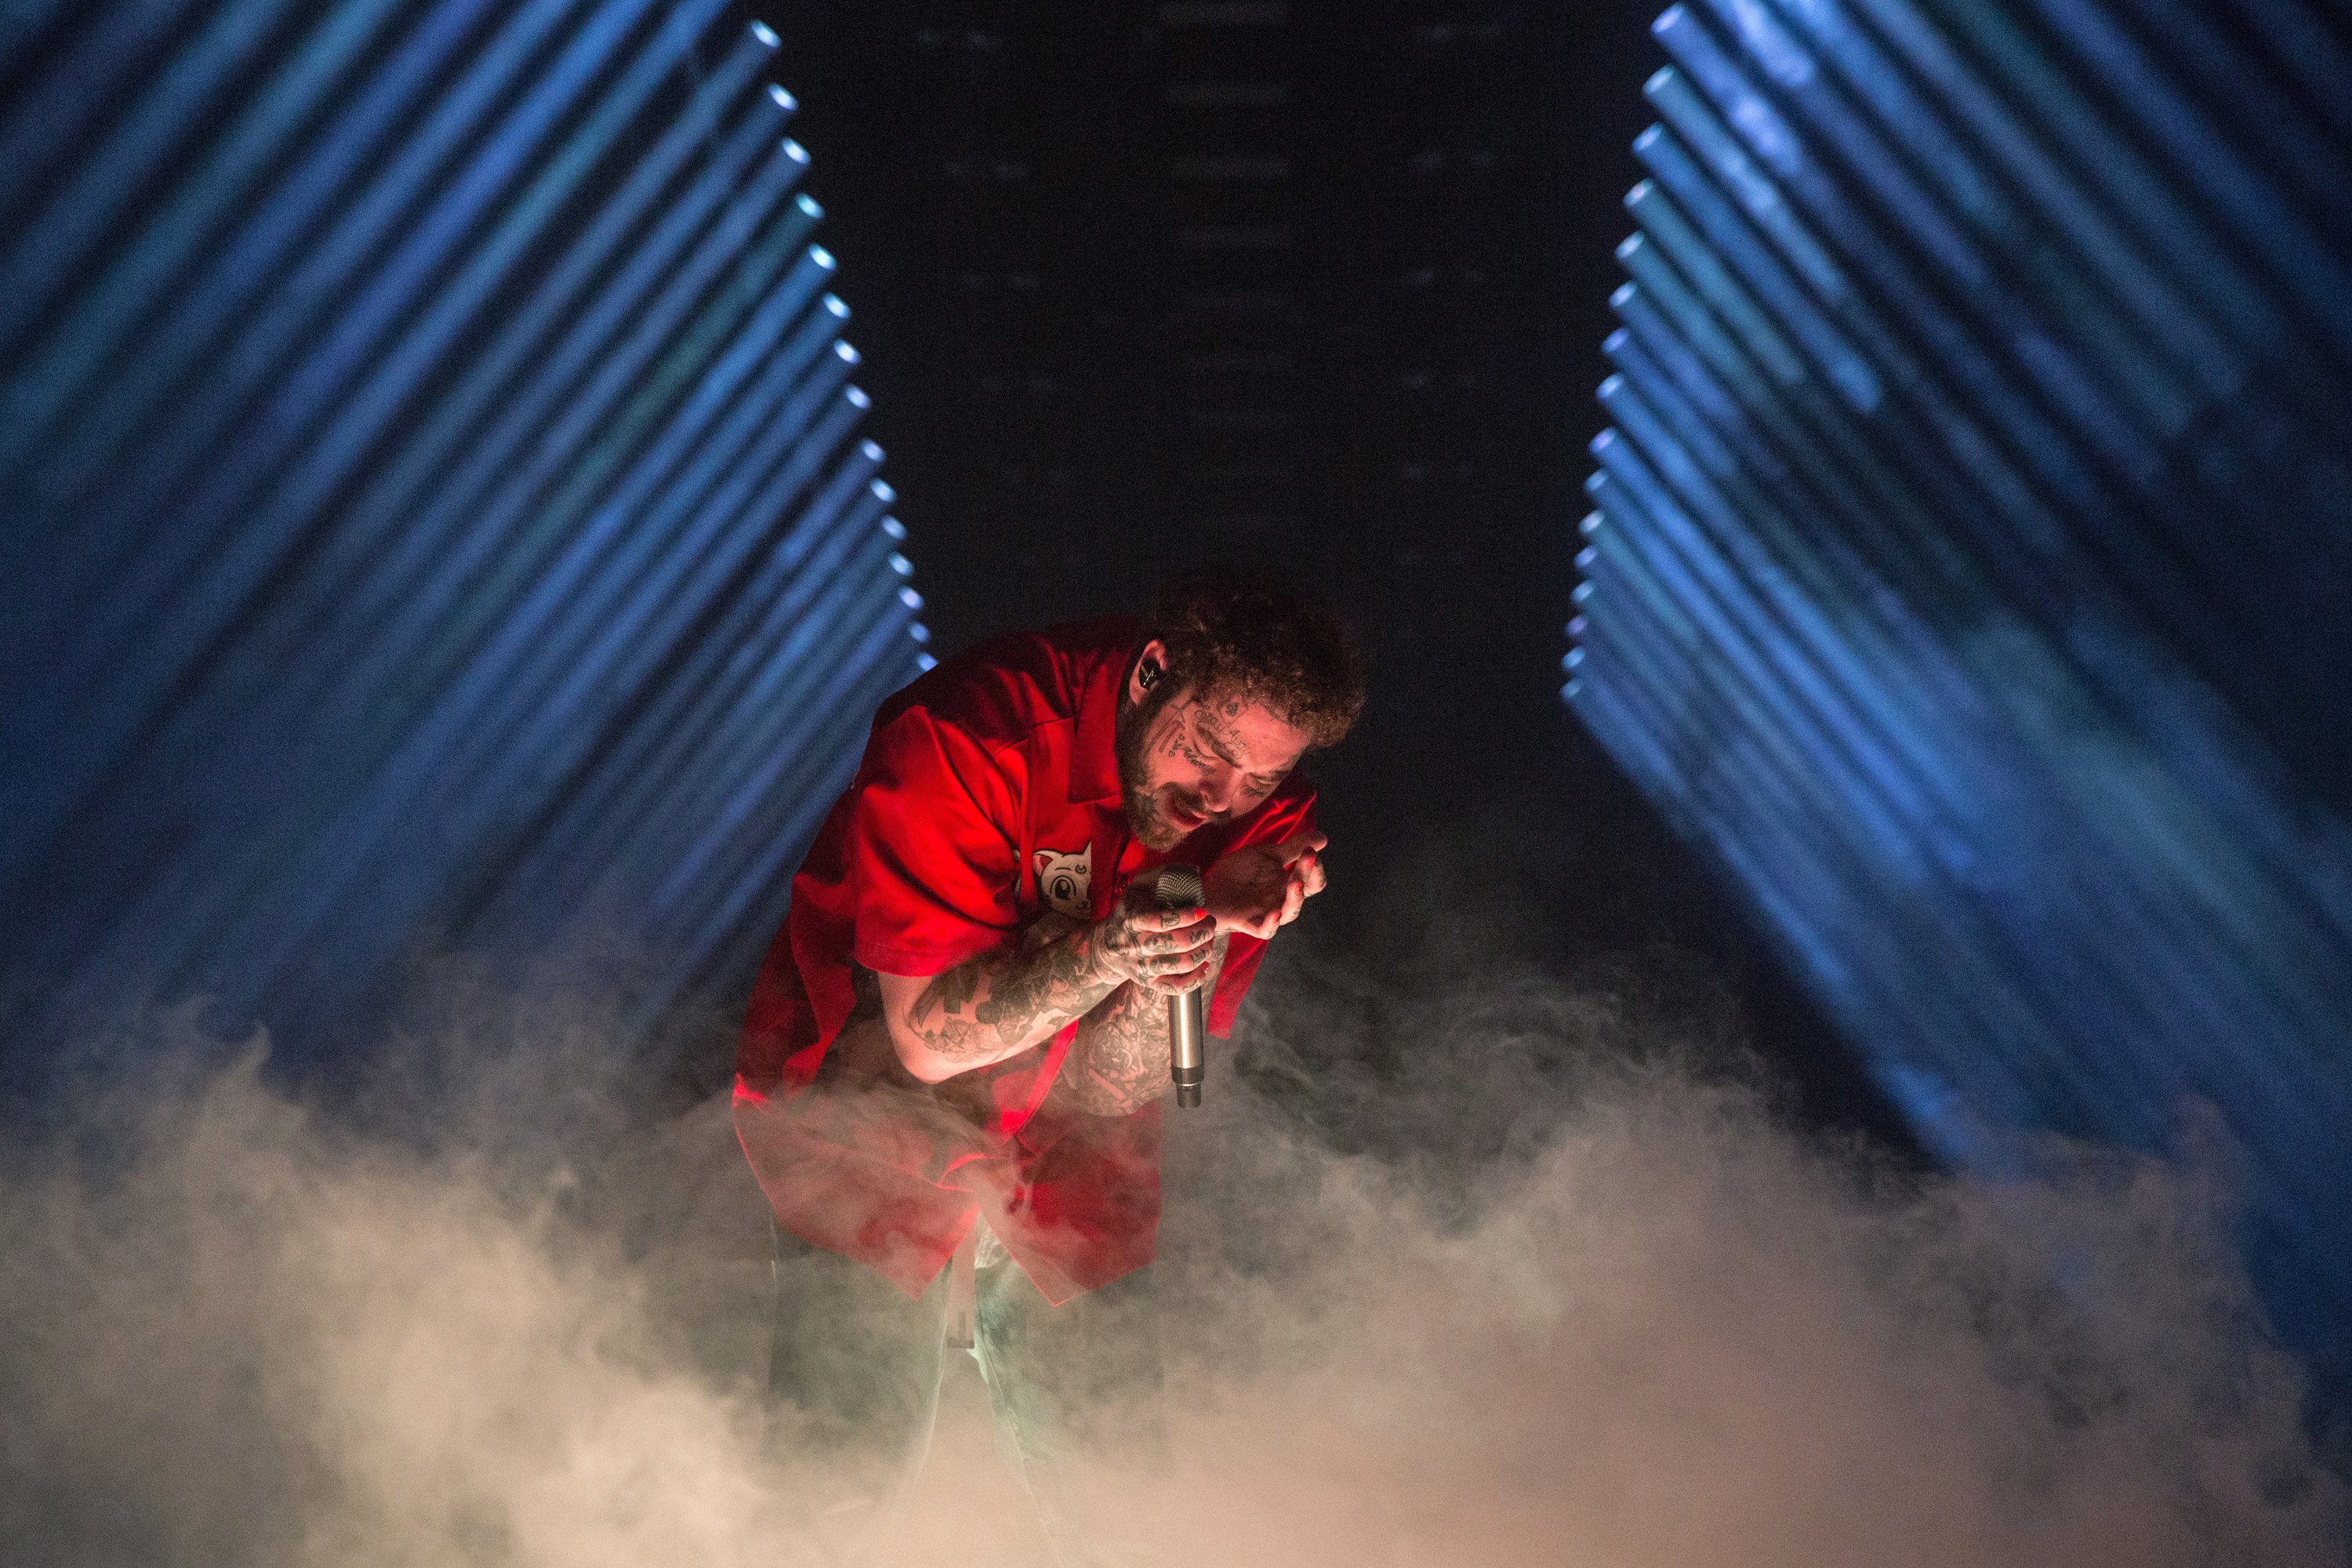 Post Malone performs on his Runway tour